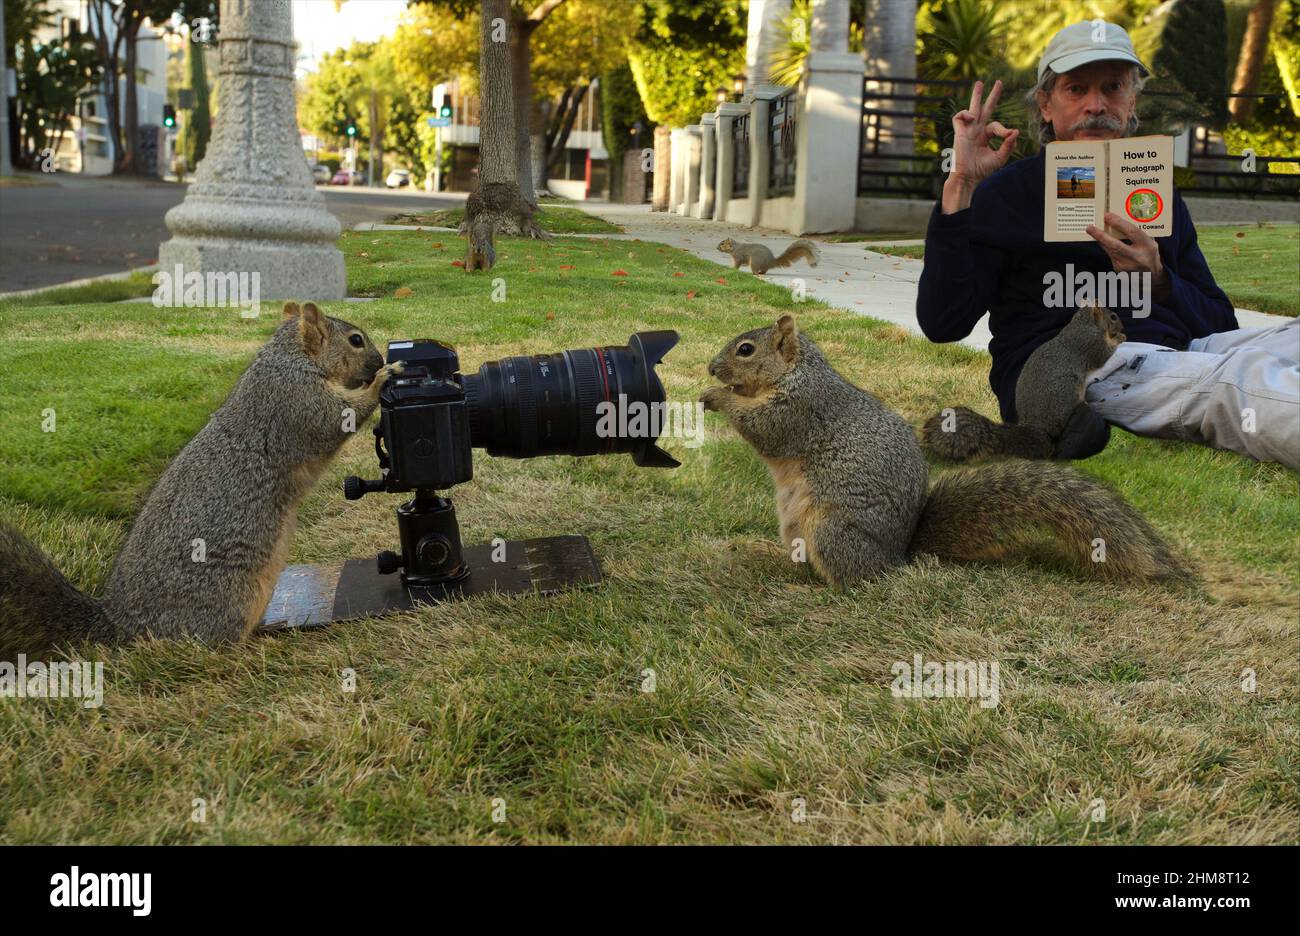 Squirrels with a camera take their own photographs Stock Photo